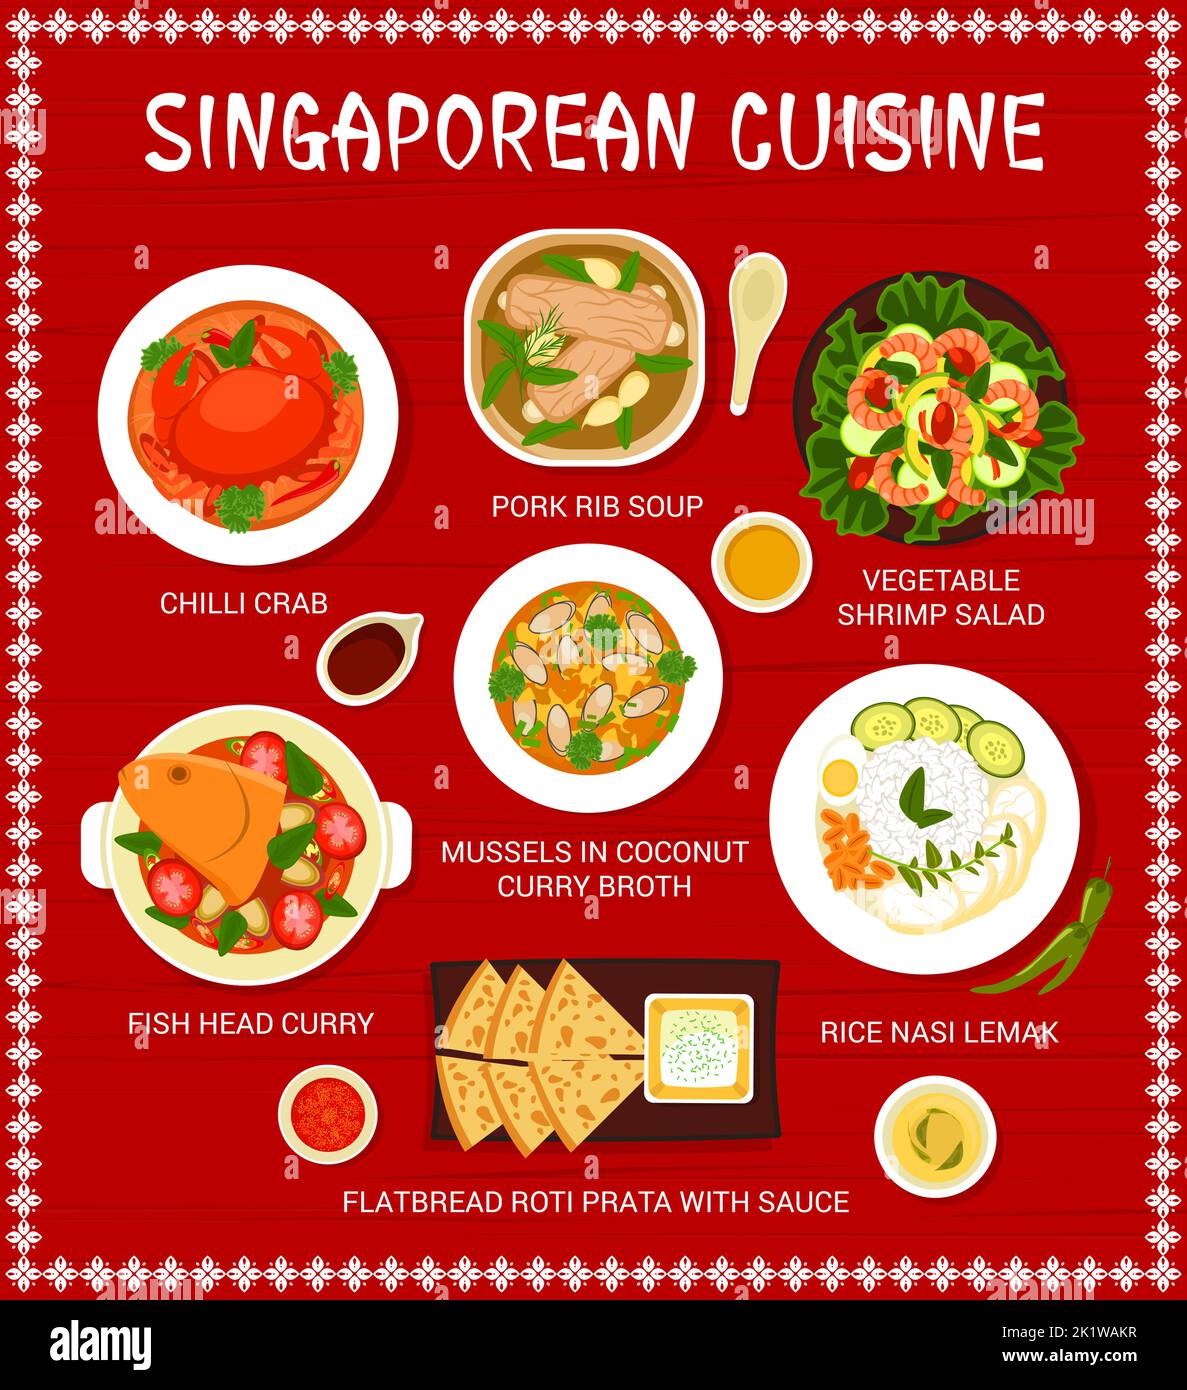 Singaporean cuisine menu design template. Pork rib soup, flatbread Roti Prata with sauce and rice Nasi Lemak, vegetable shrimp salad and mussels in coconut curry broth, fish head curry, chilli crab Stock Vector